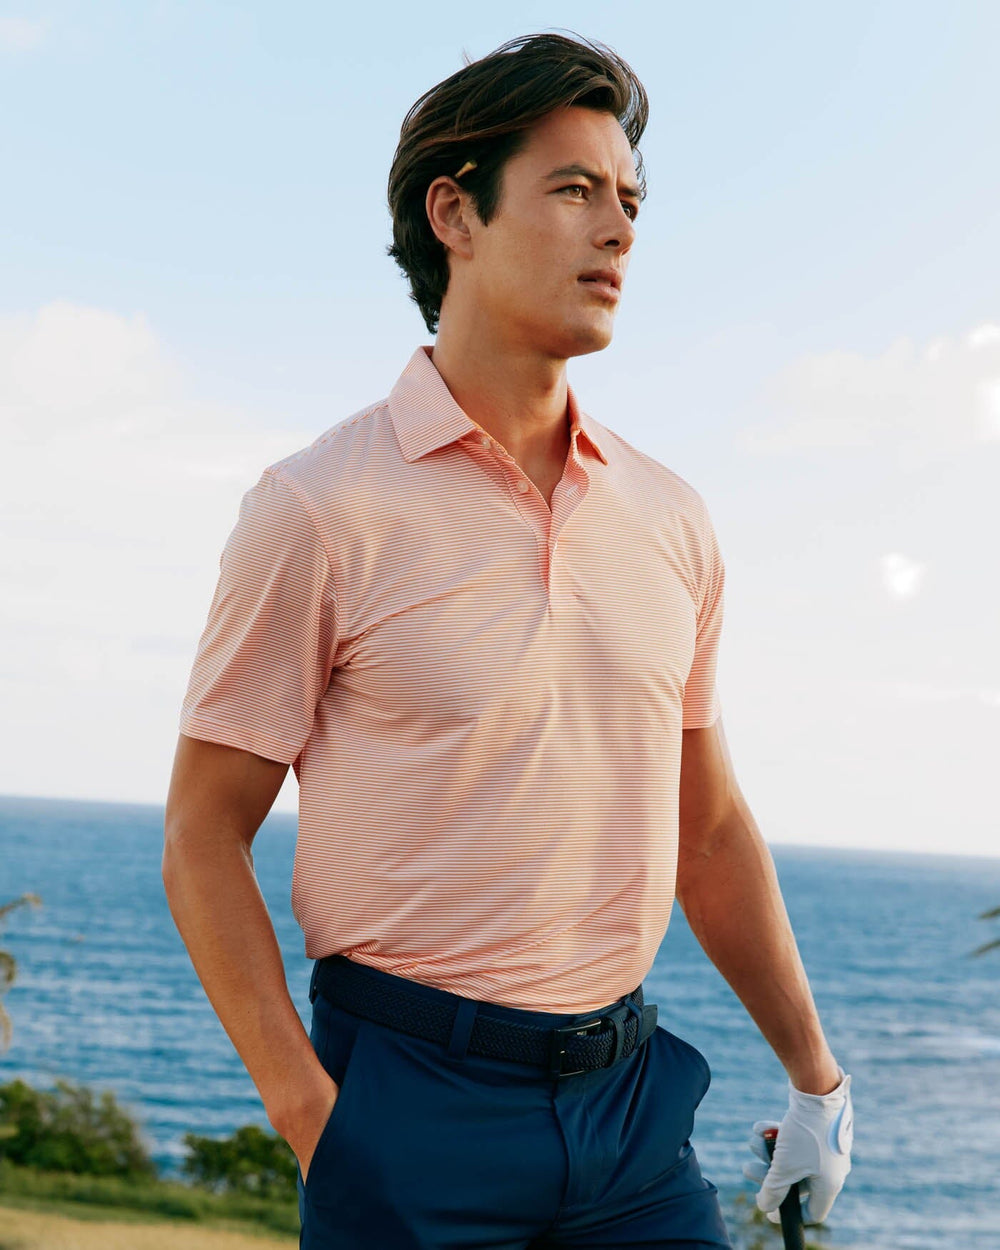 The front view of the Southern Tide brrr-eeze-meadowbrook-stripe-polo by Southern Tide - Tangerine Orange